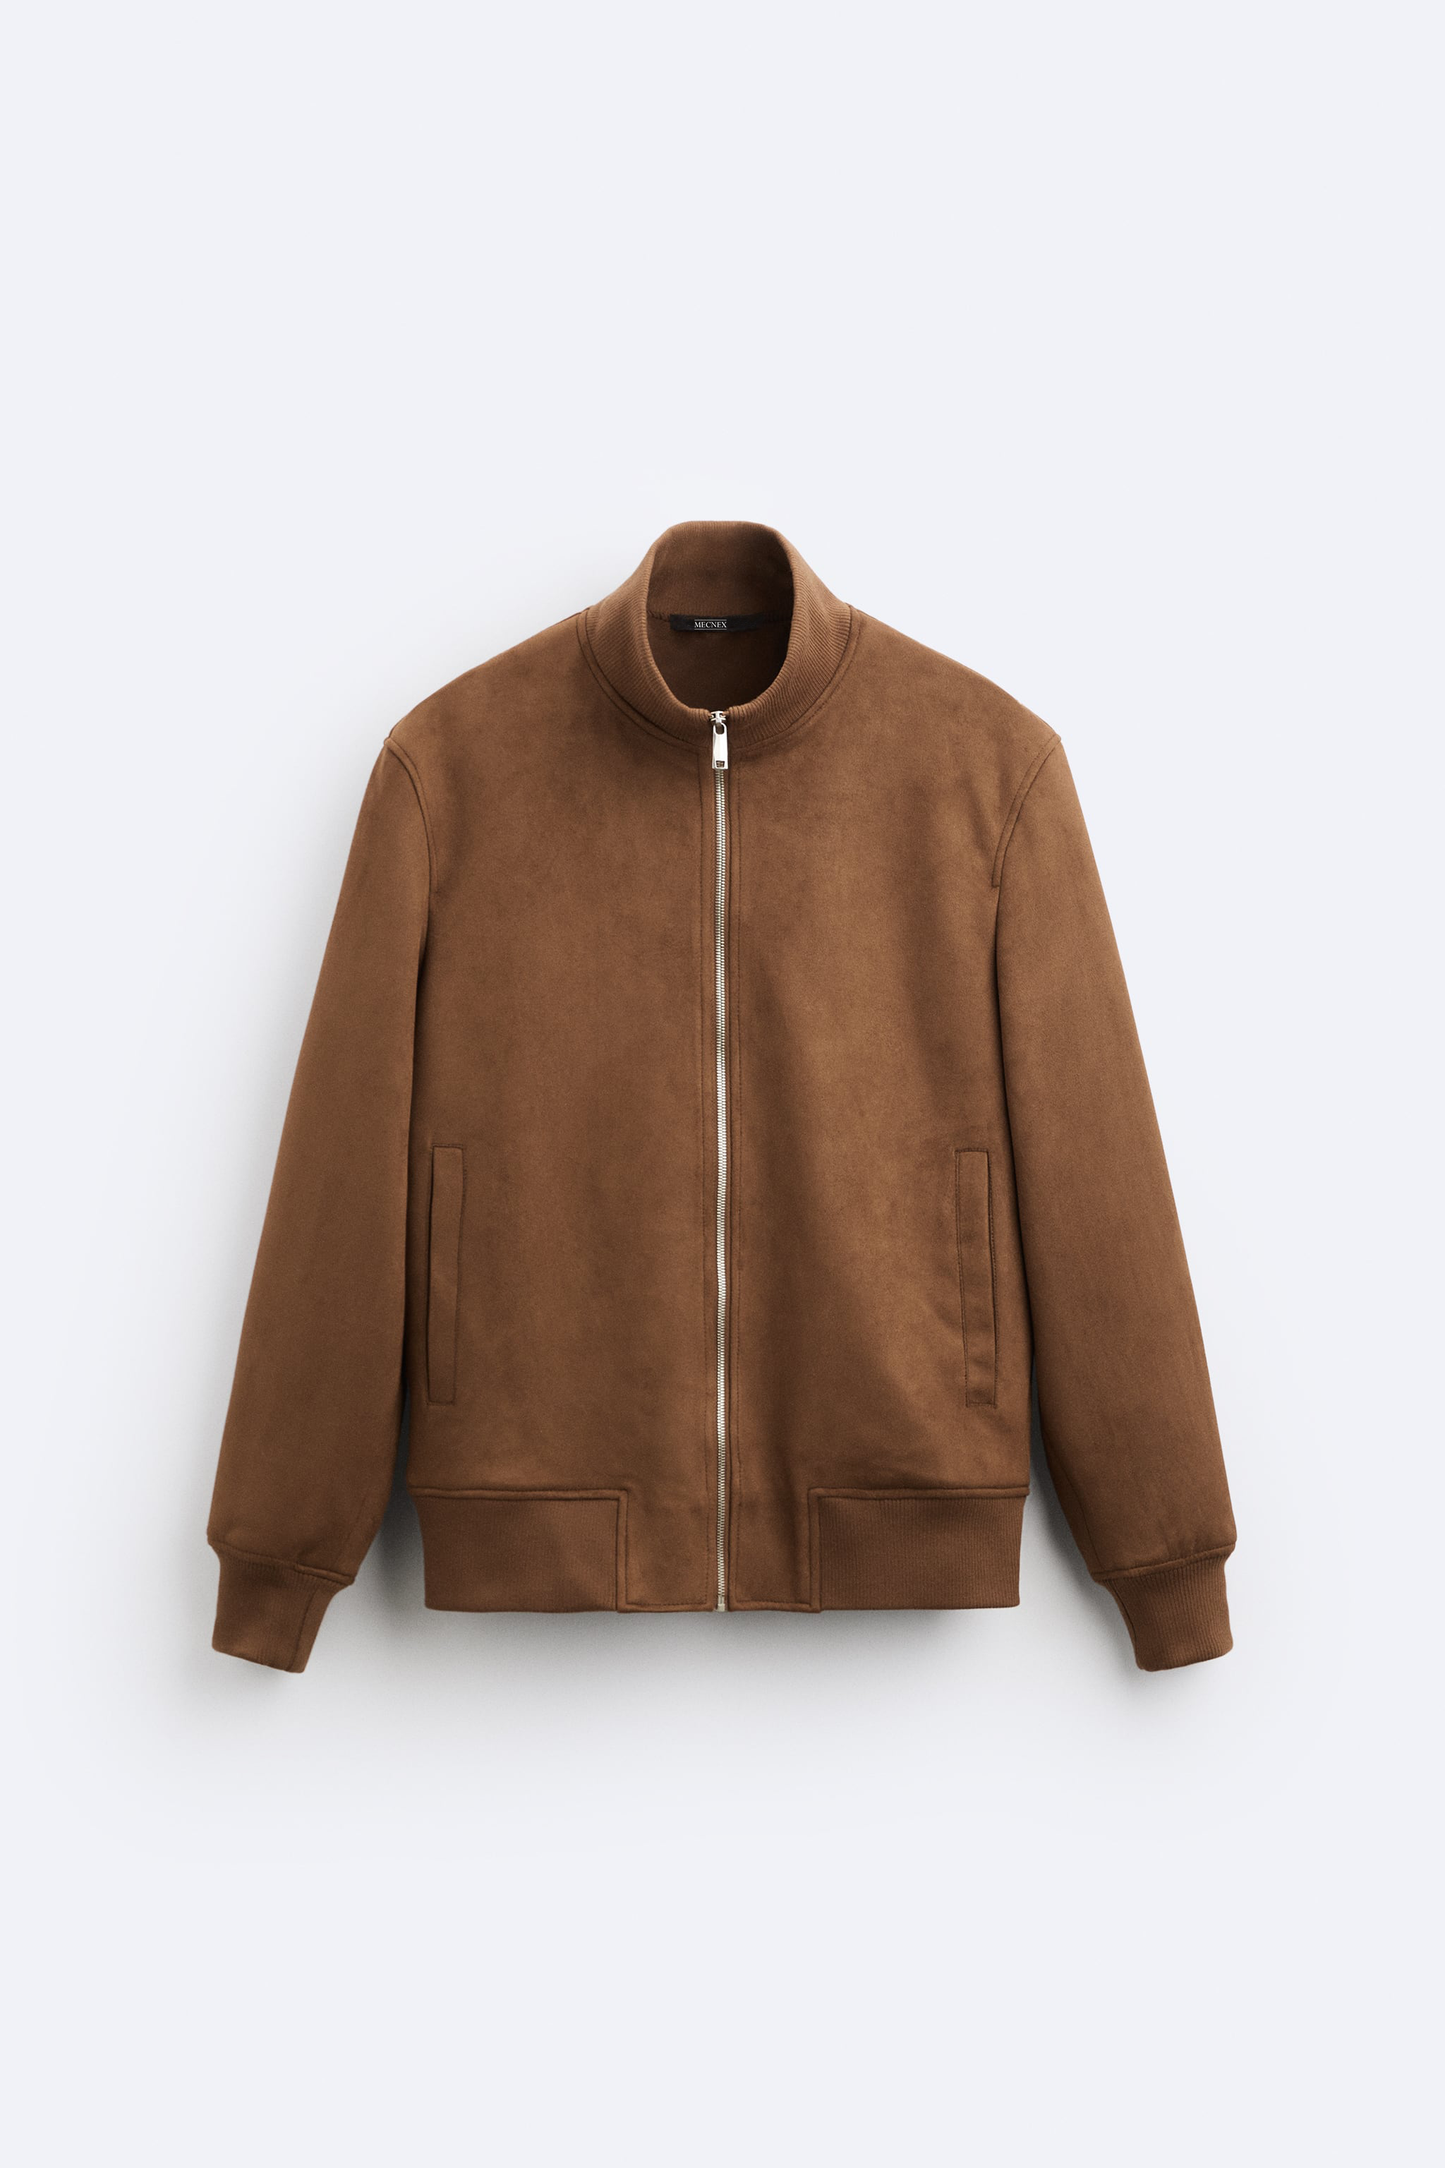 SUEDE LEATHER BROWN JACKET